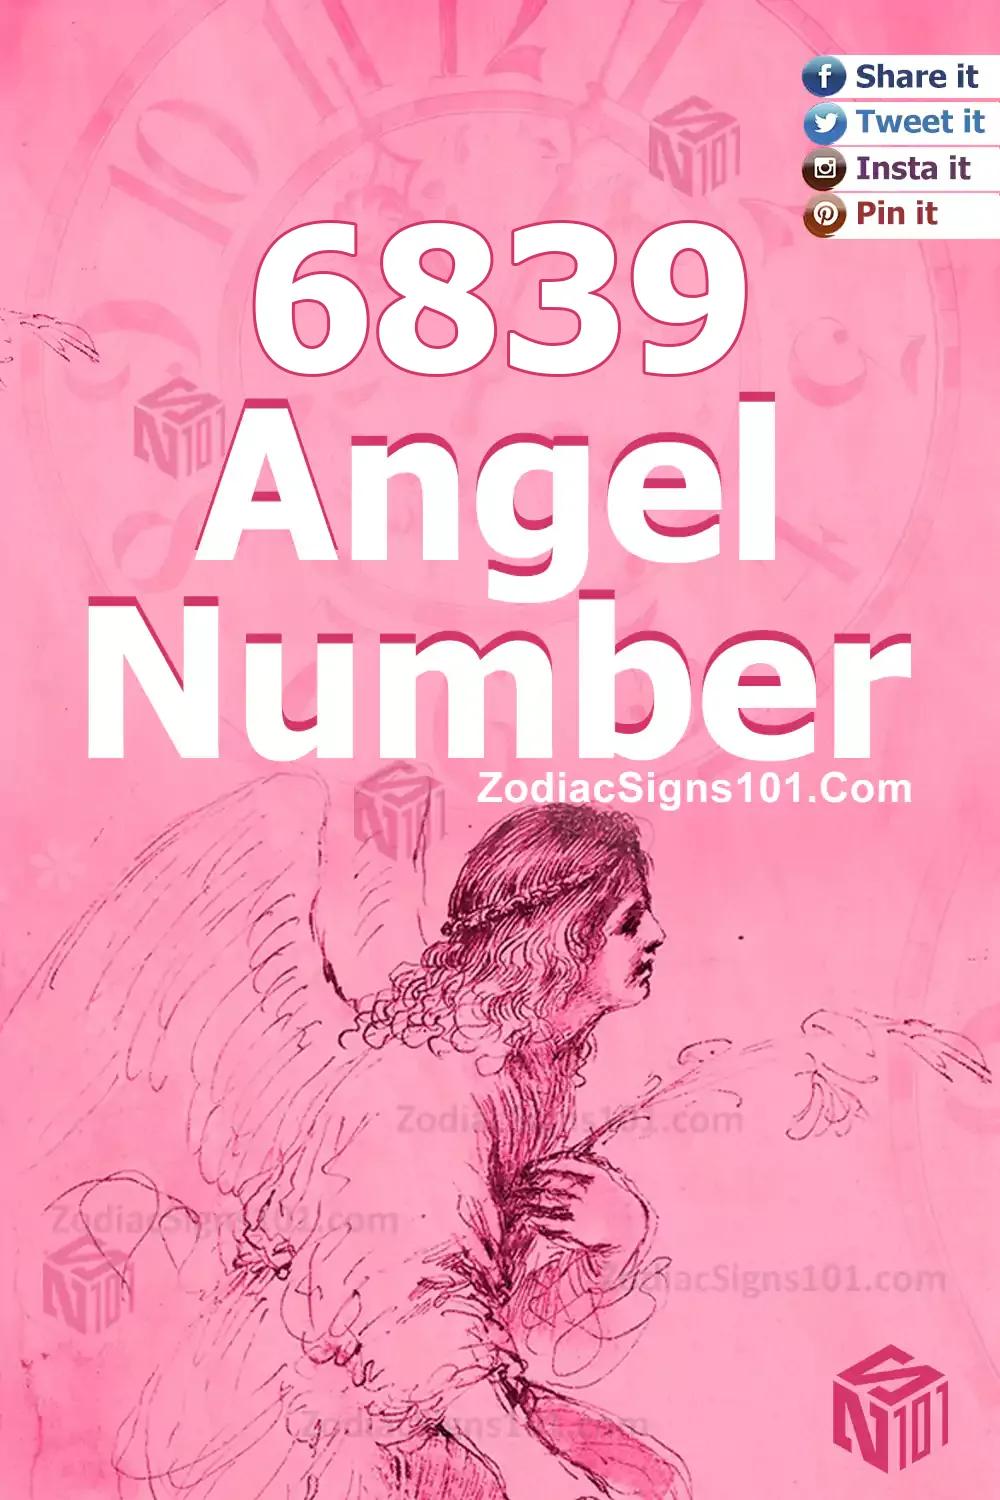 6839 Angel Number Meaning